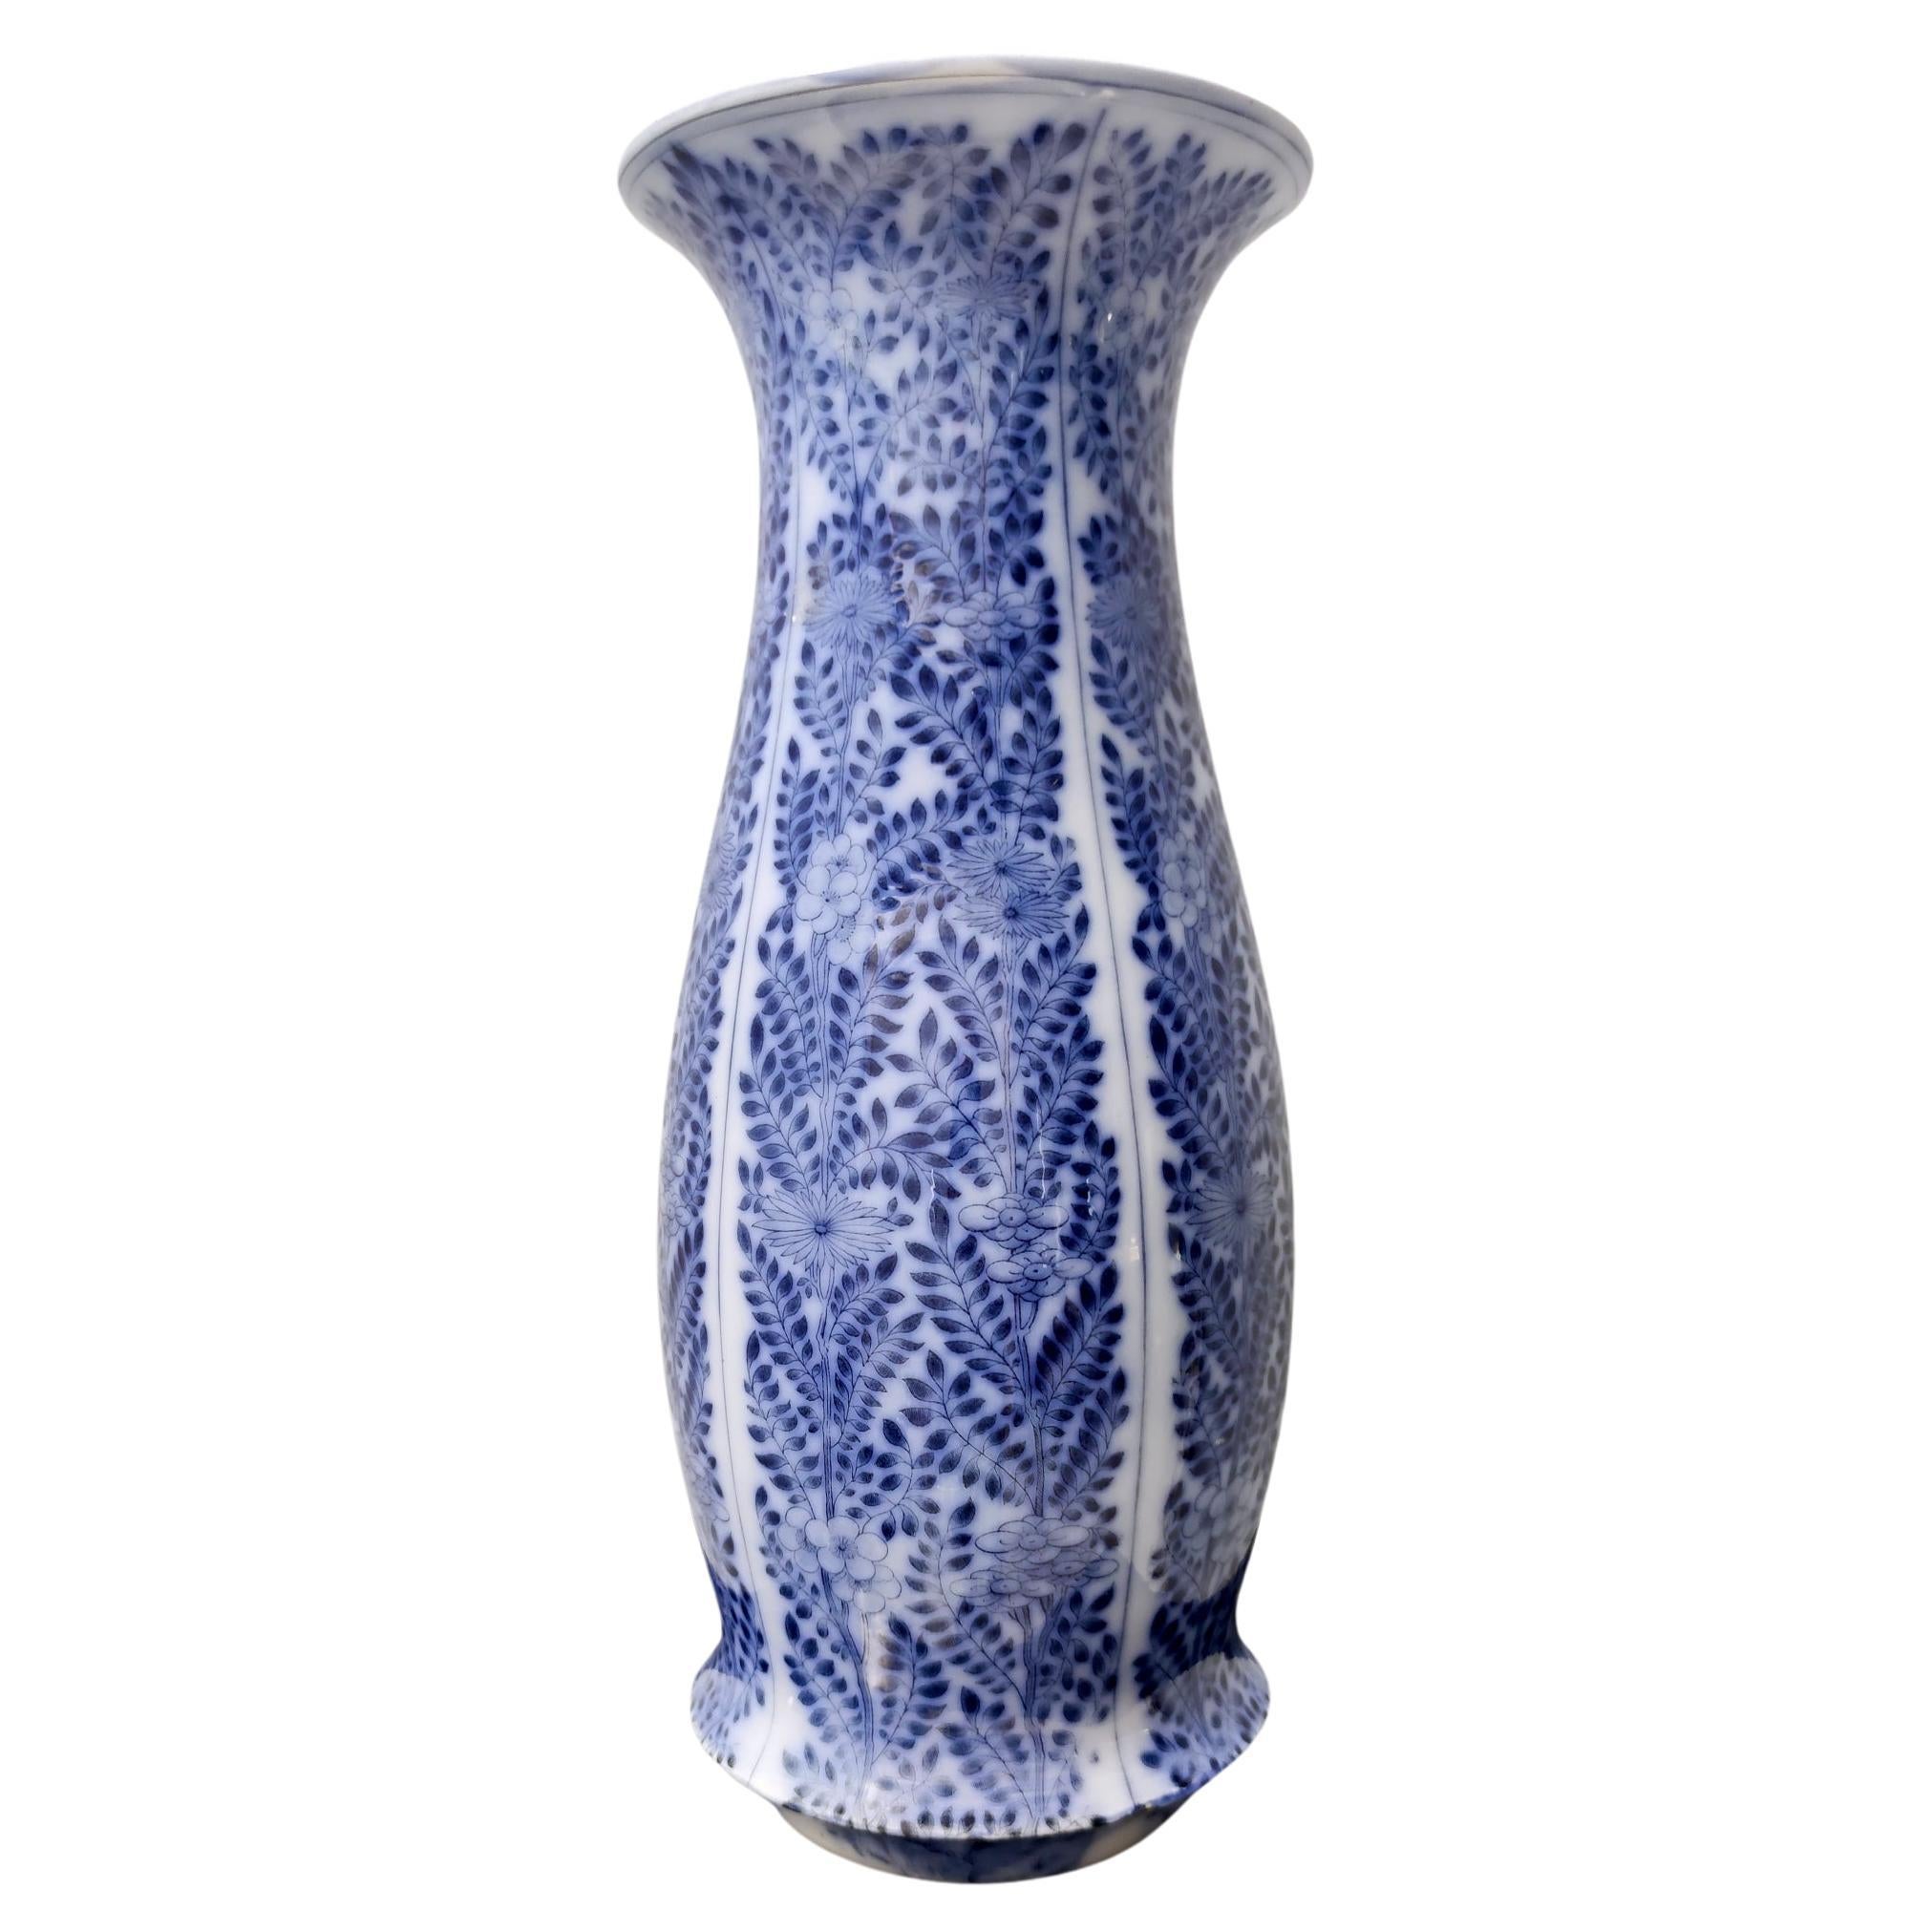 Blue Lacquered Ceramic Vase by Laveno Chinoiserie Style, Italy